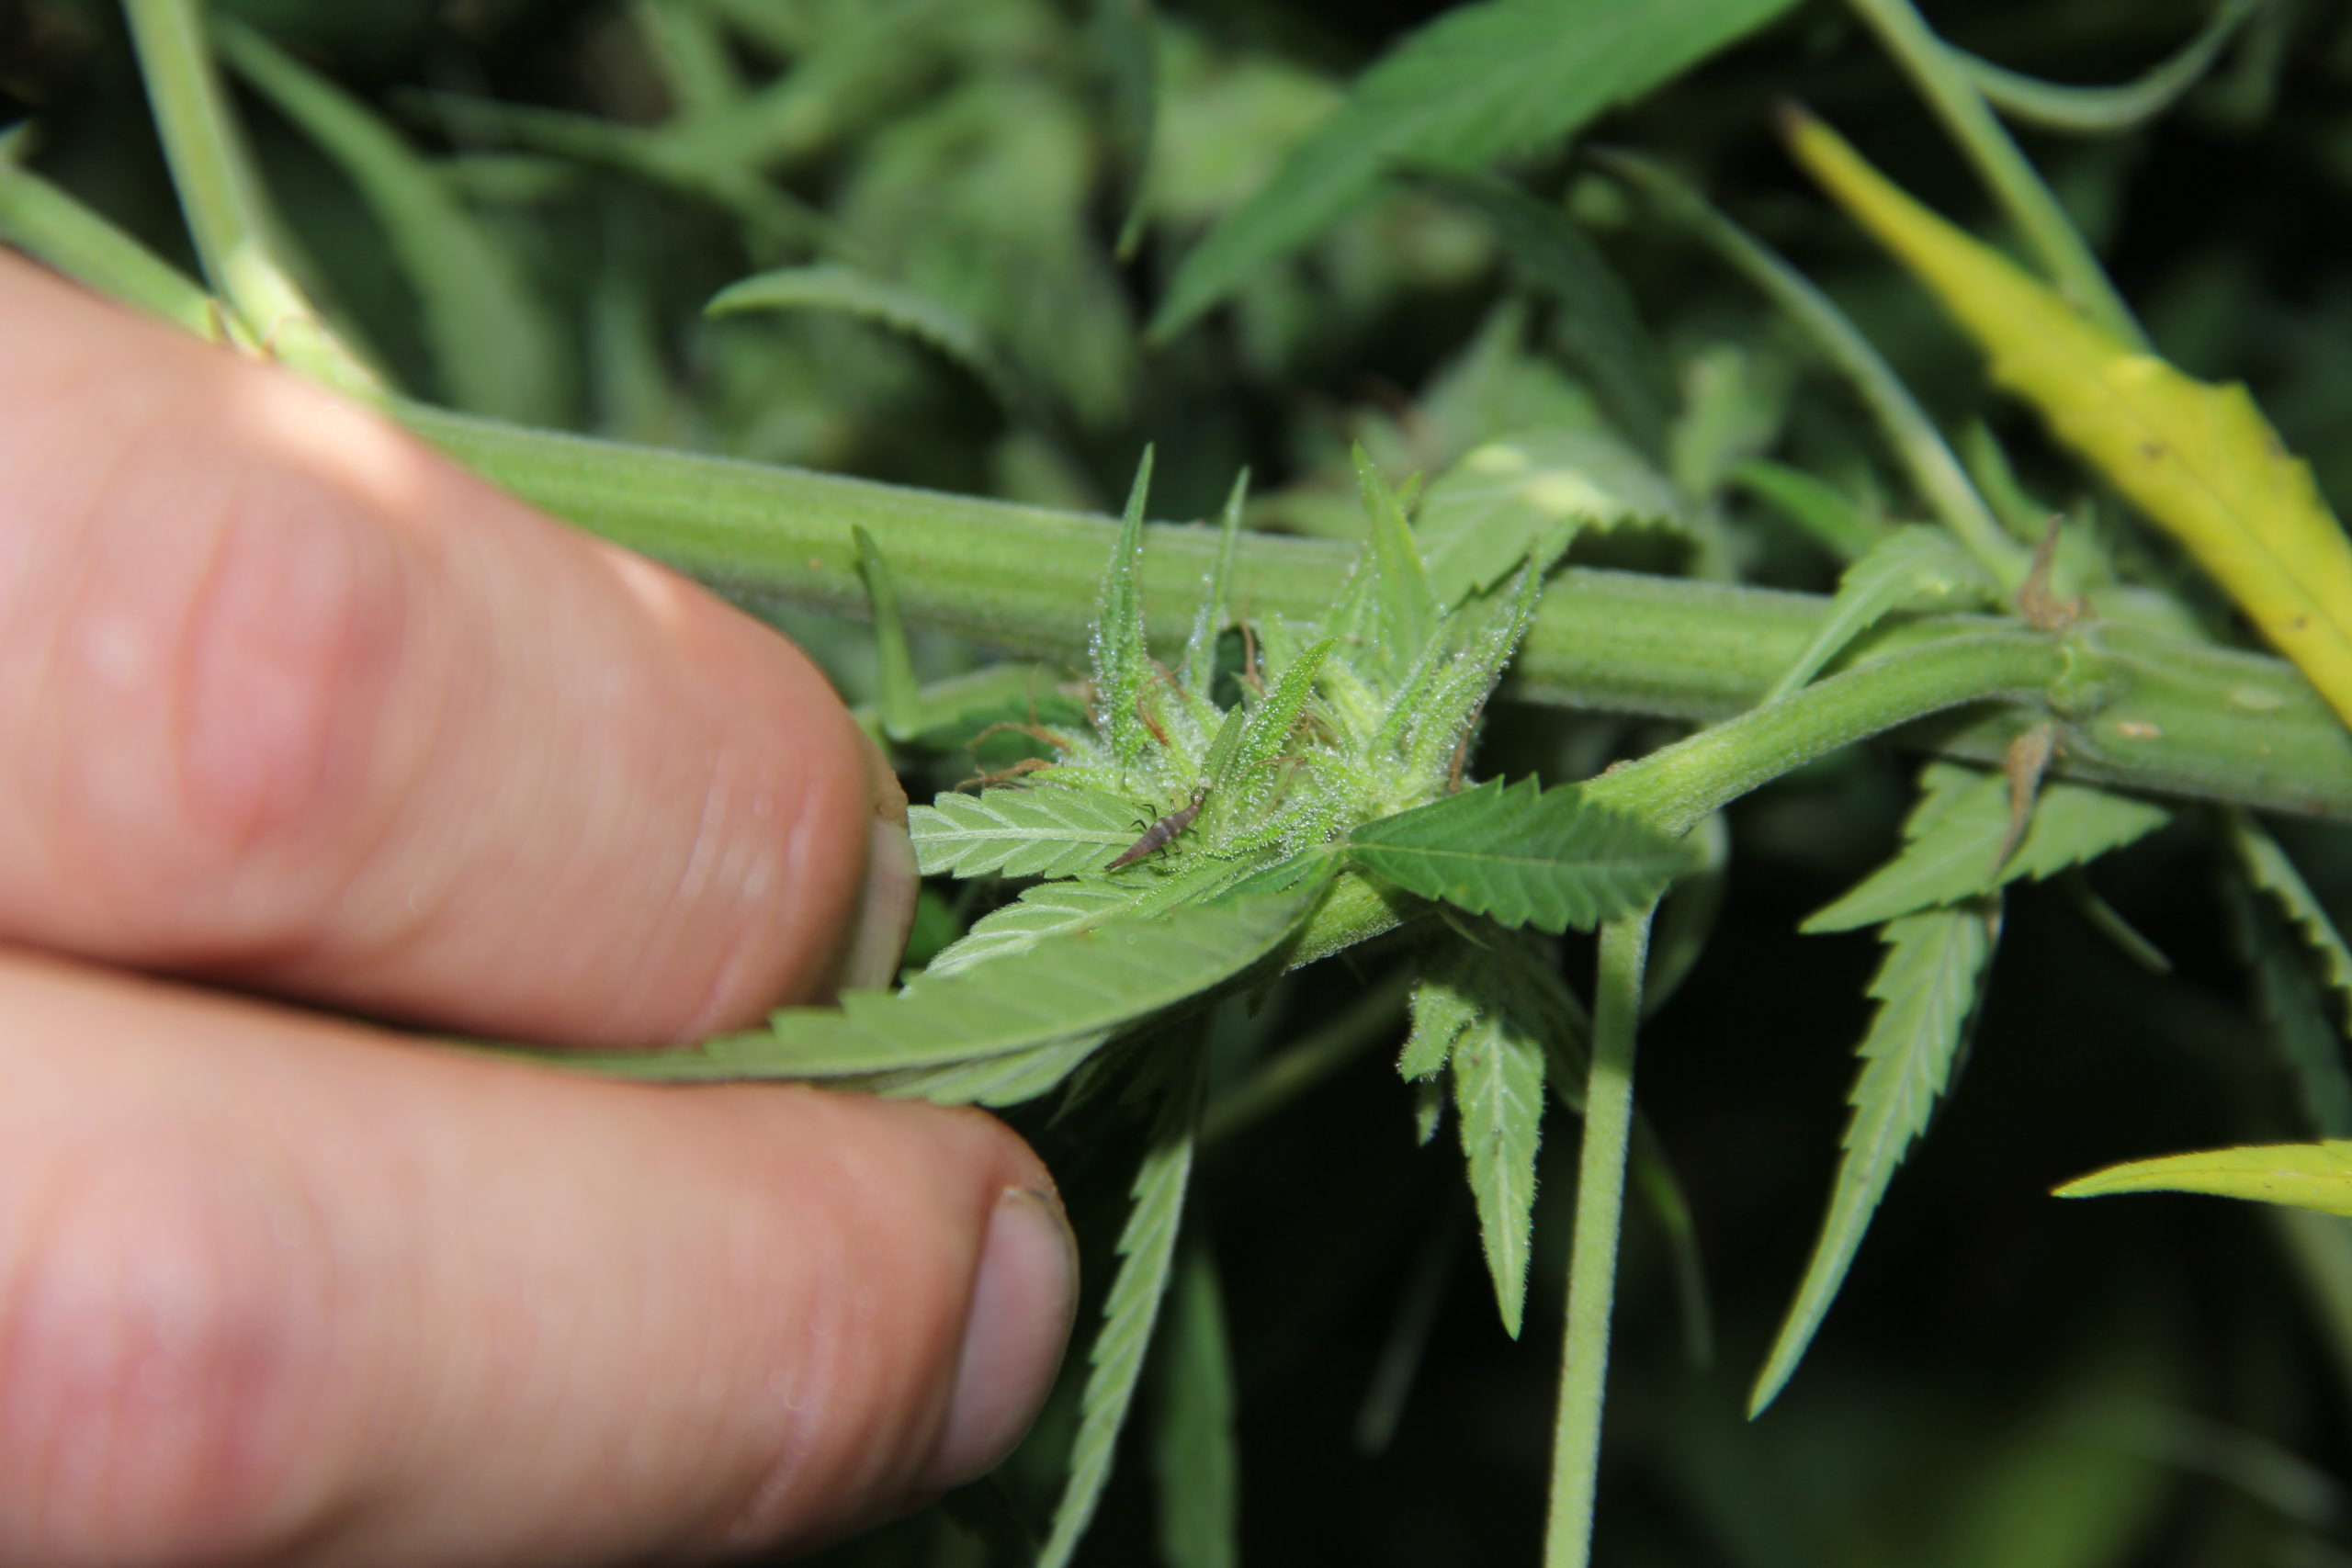 Image of insects on hemp plant